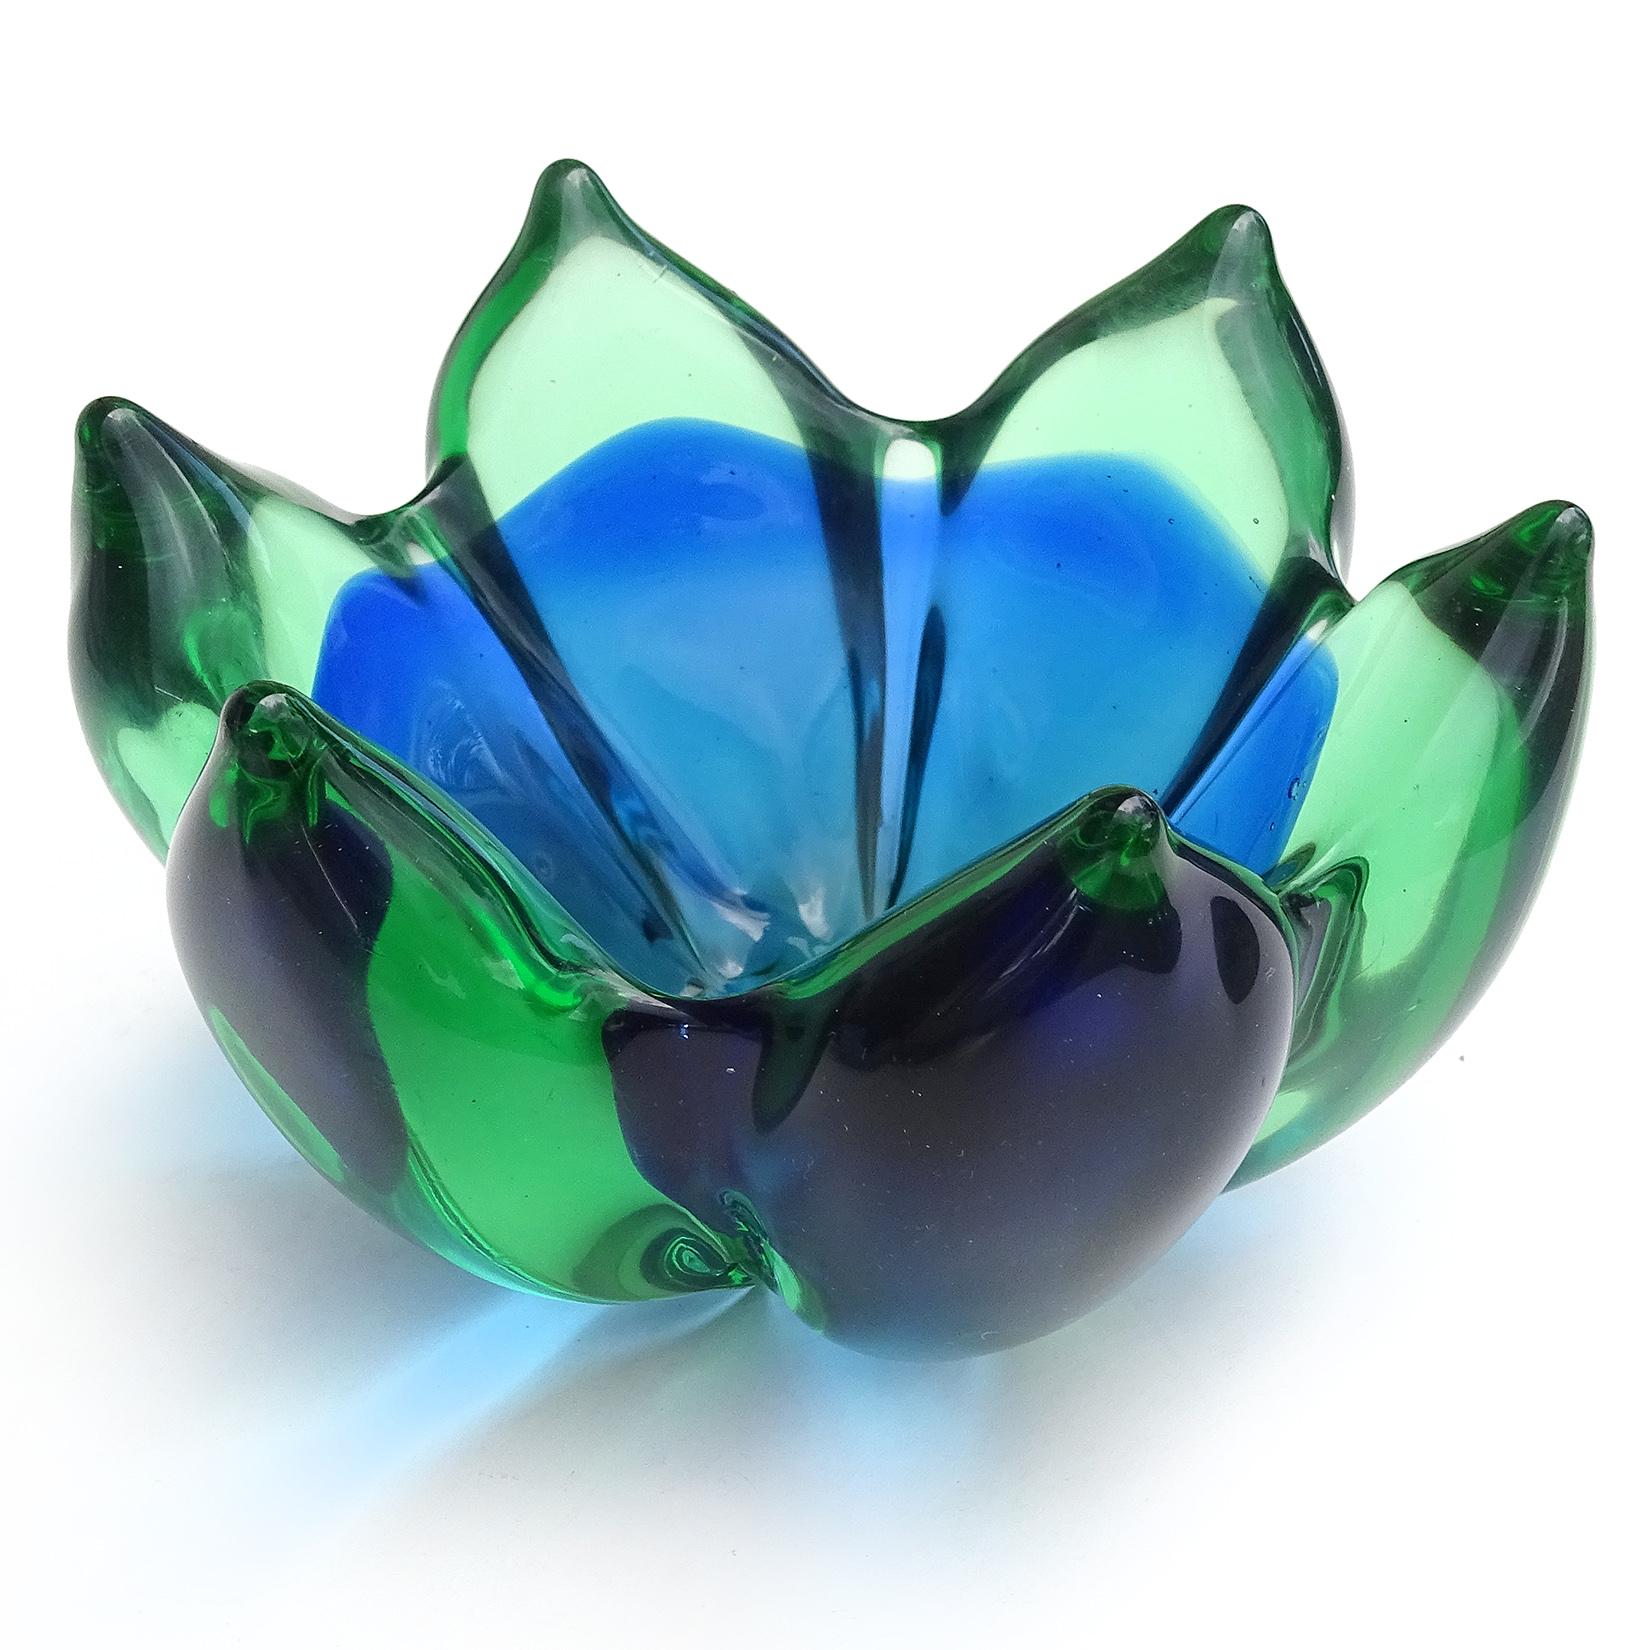 Seguso Murano Sommerso Blue Green Italian Art Glass Lotus Flower Bowl Dish In Good Condition For Sale In Kissimmee, FL